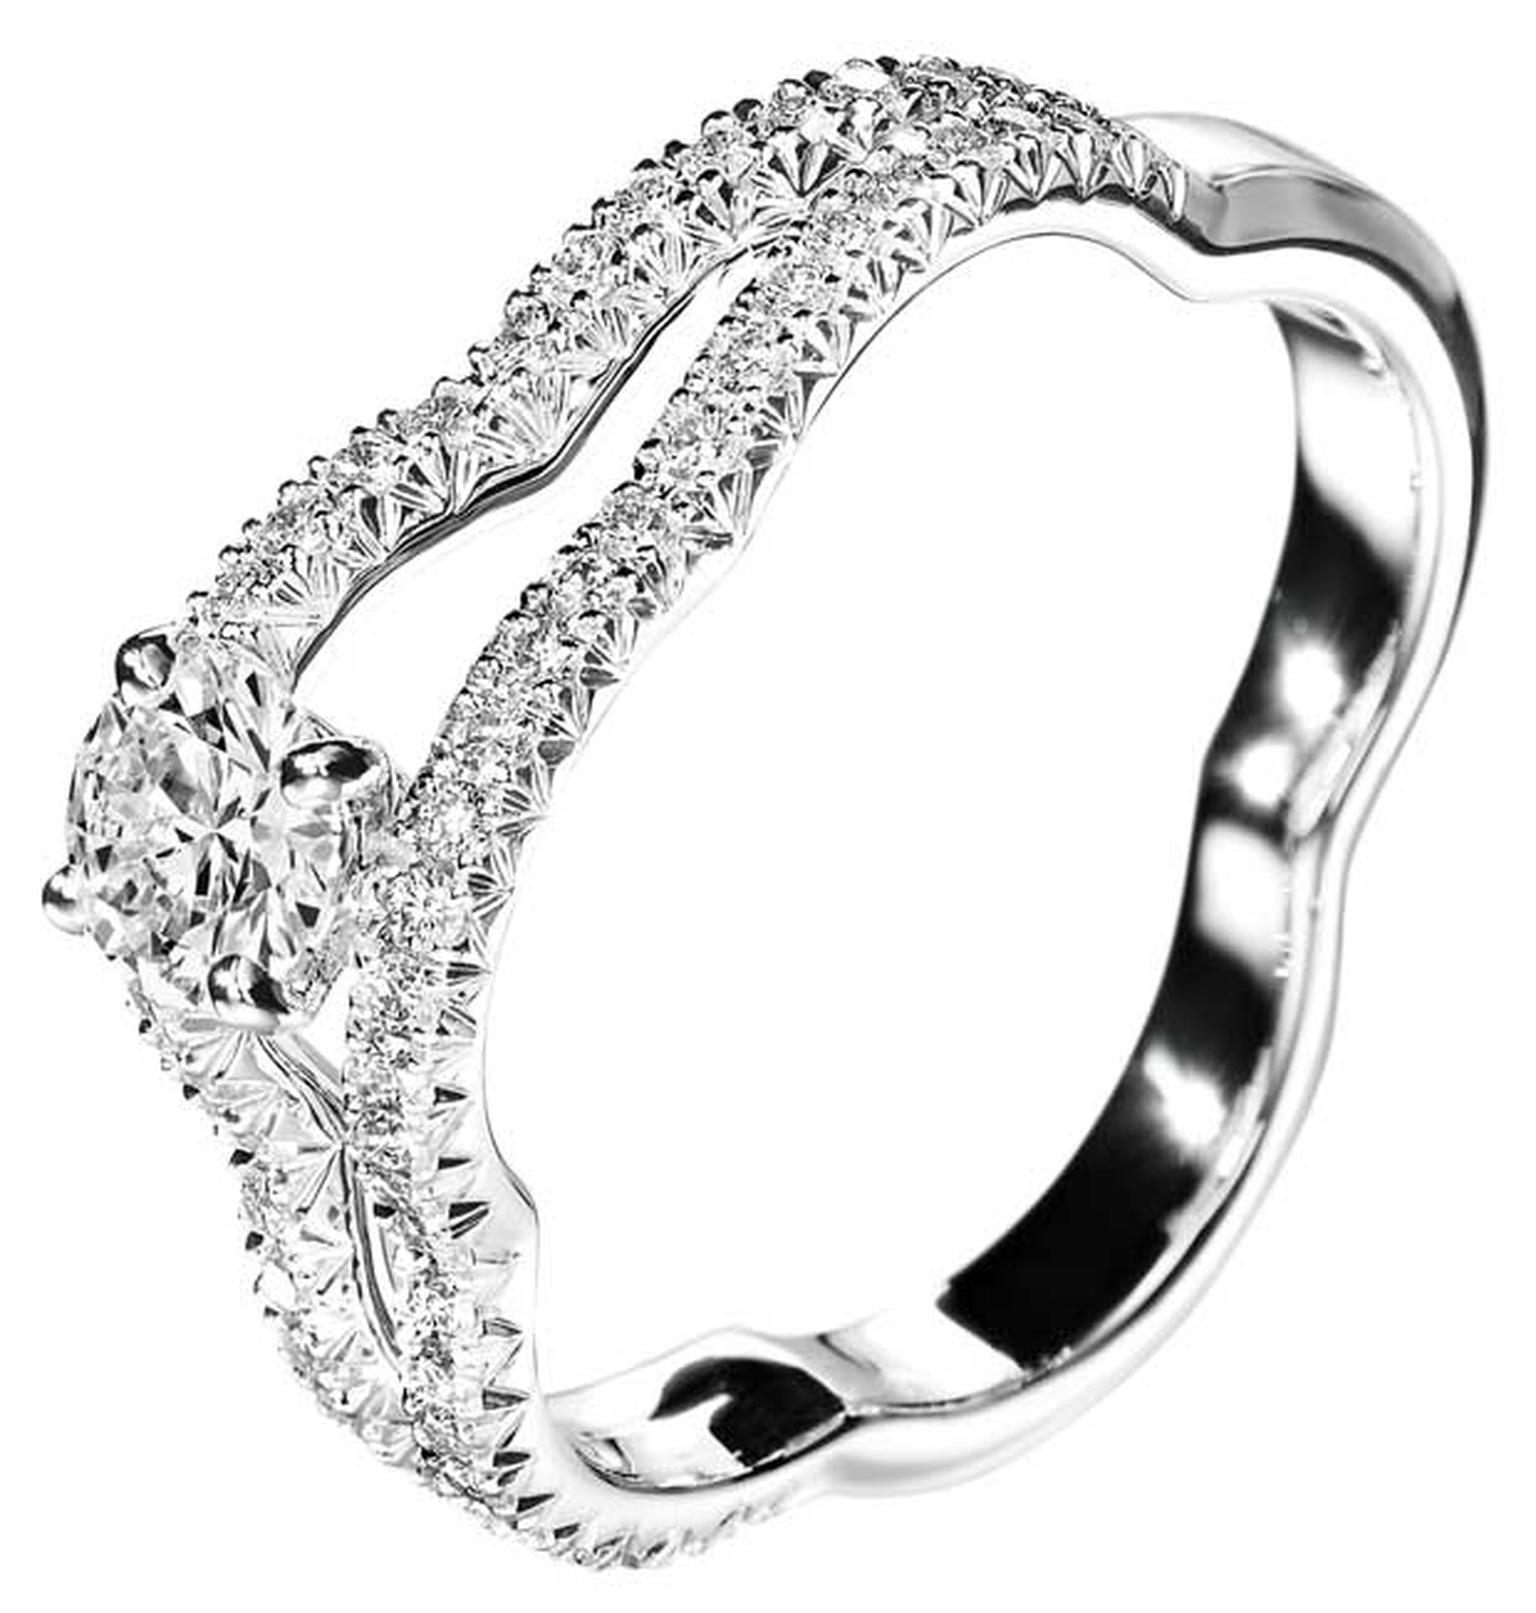 Chanel Camelia diamond and white gold Ajoure ring